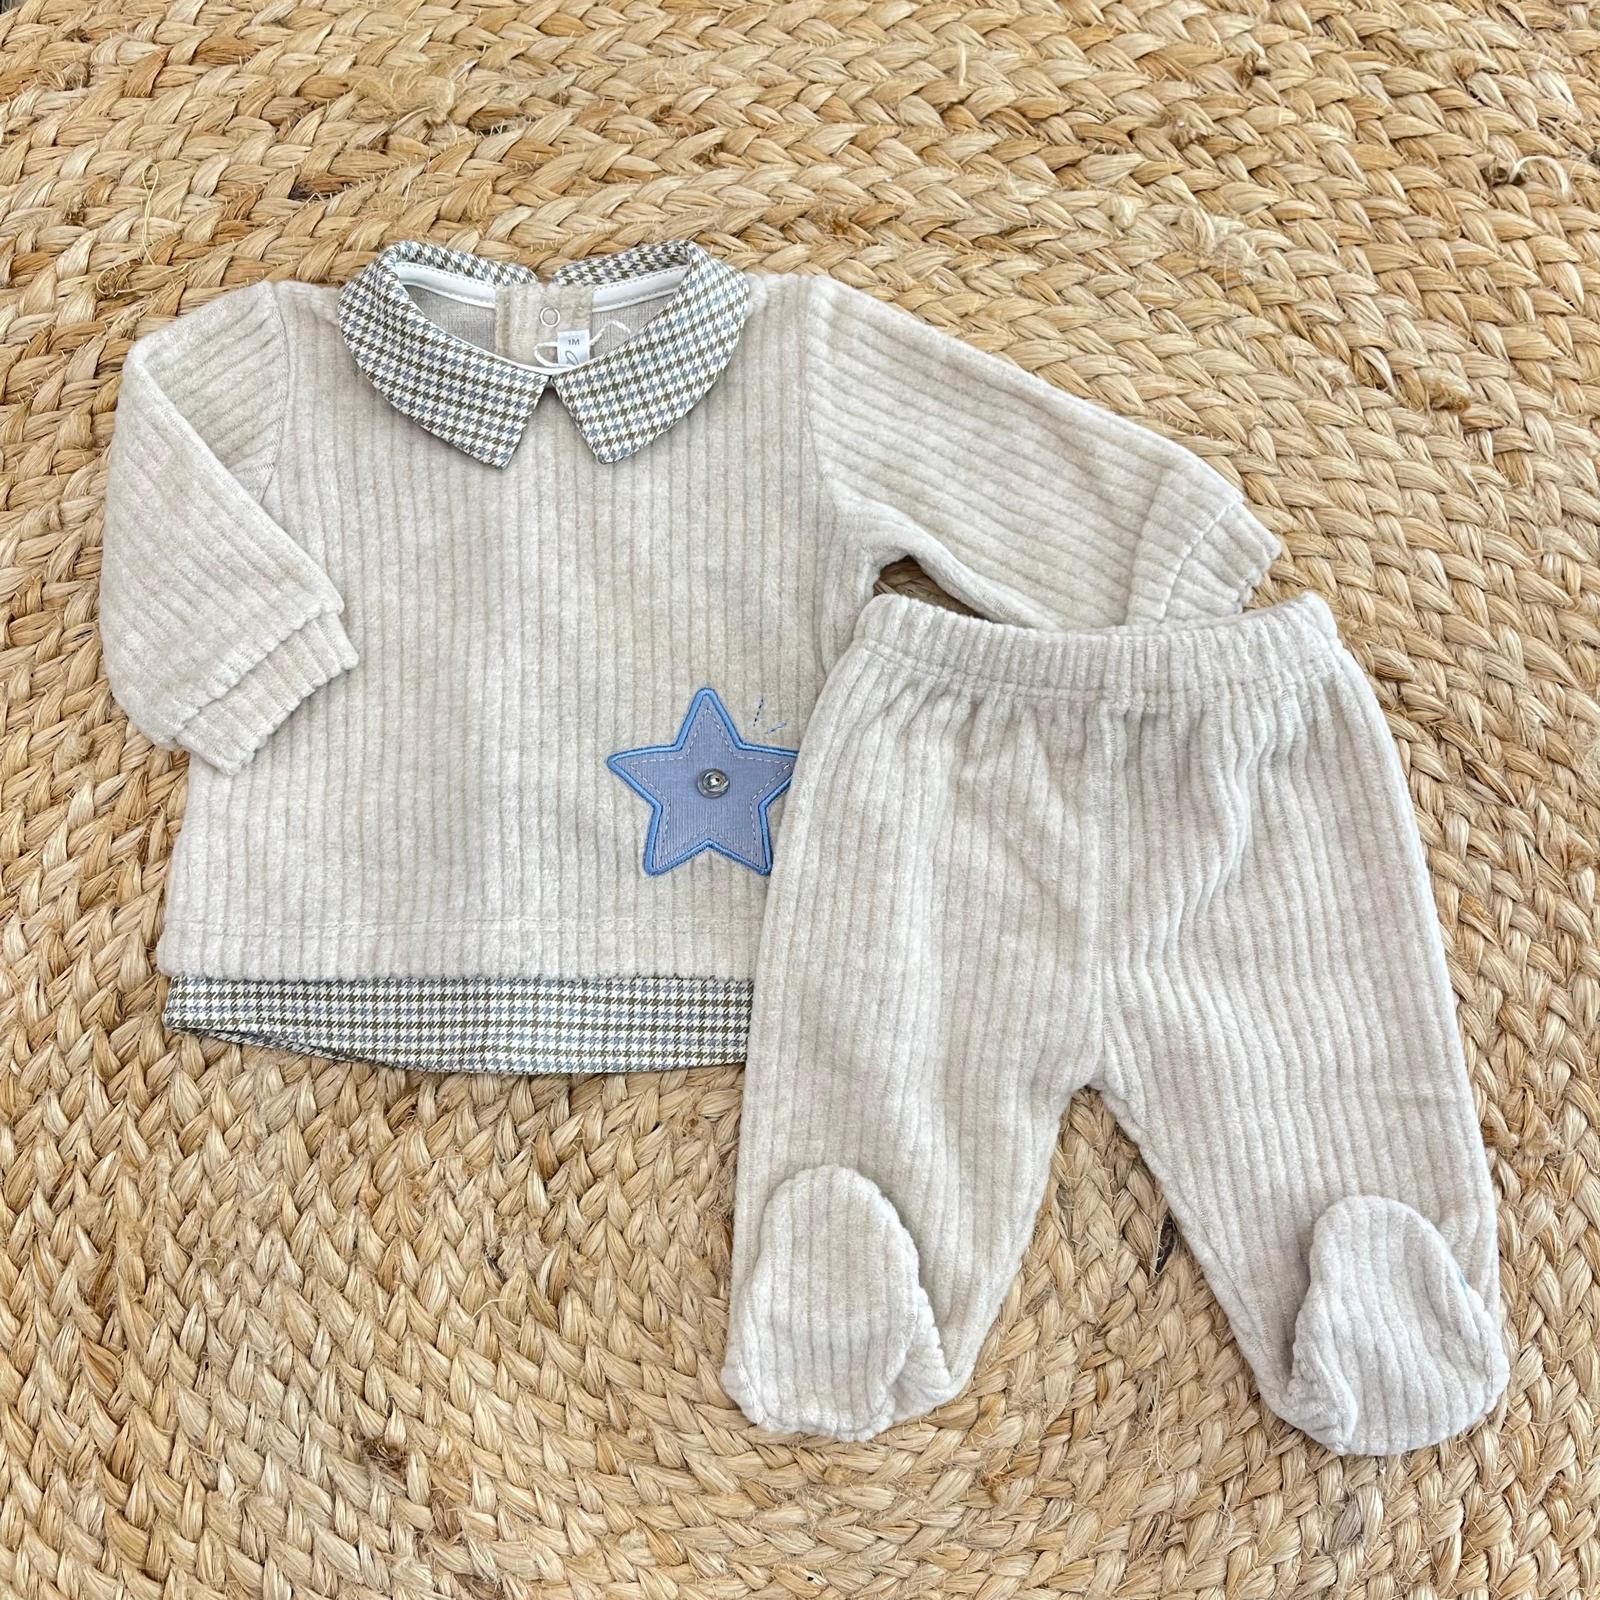 Barcellino Stars Outfit